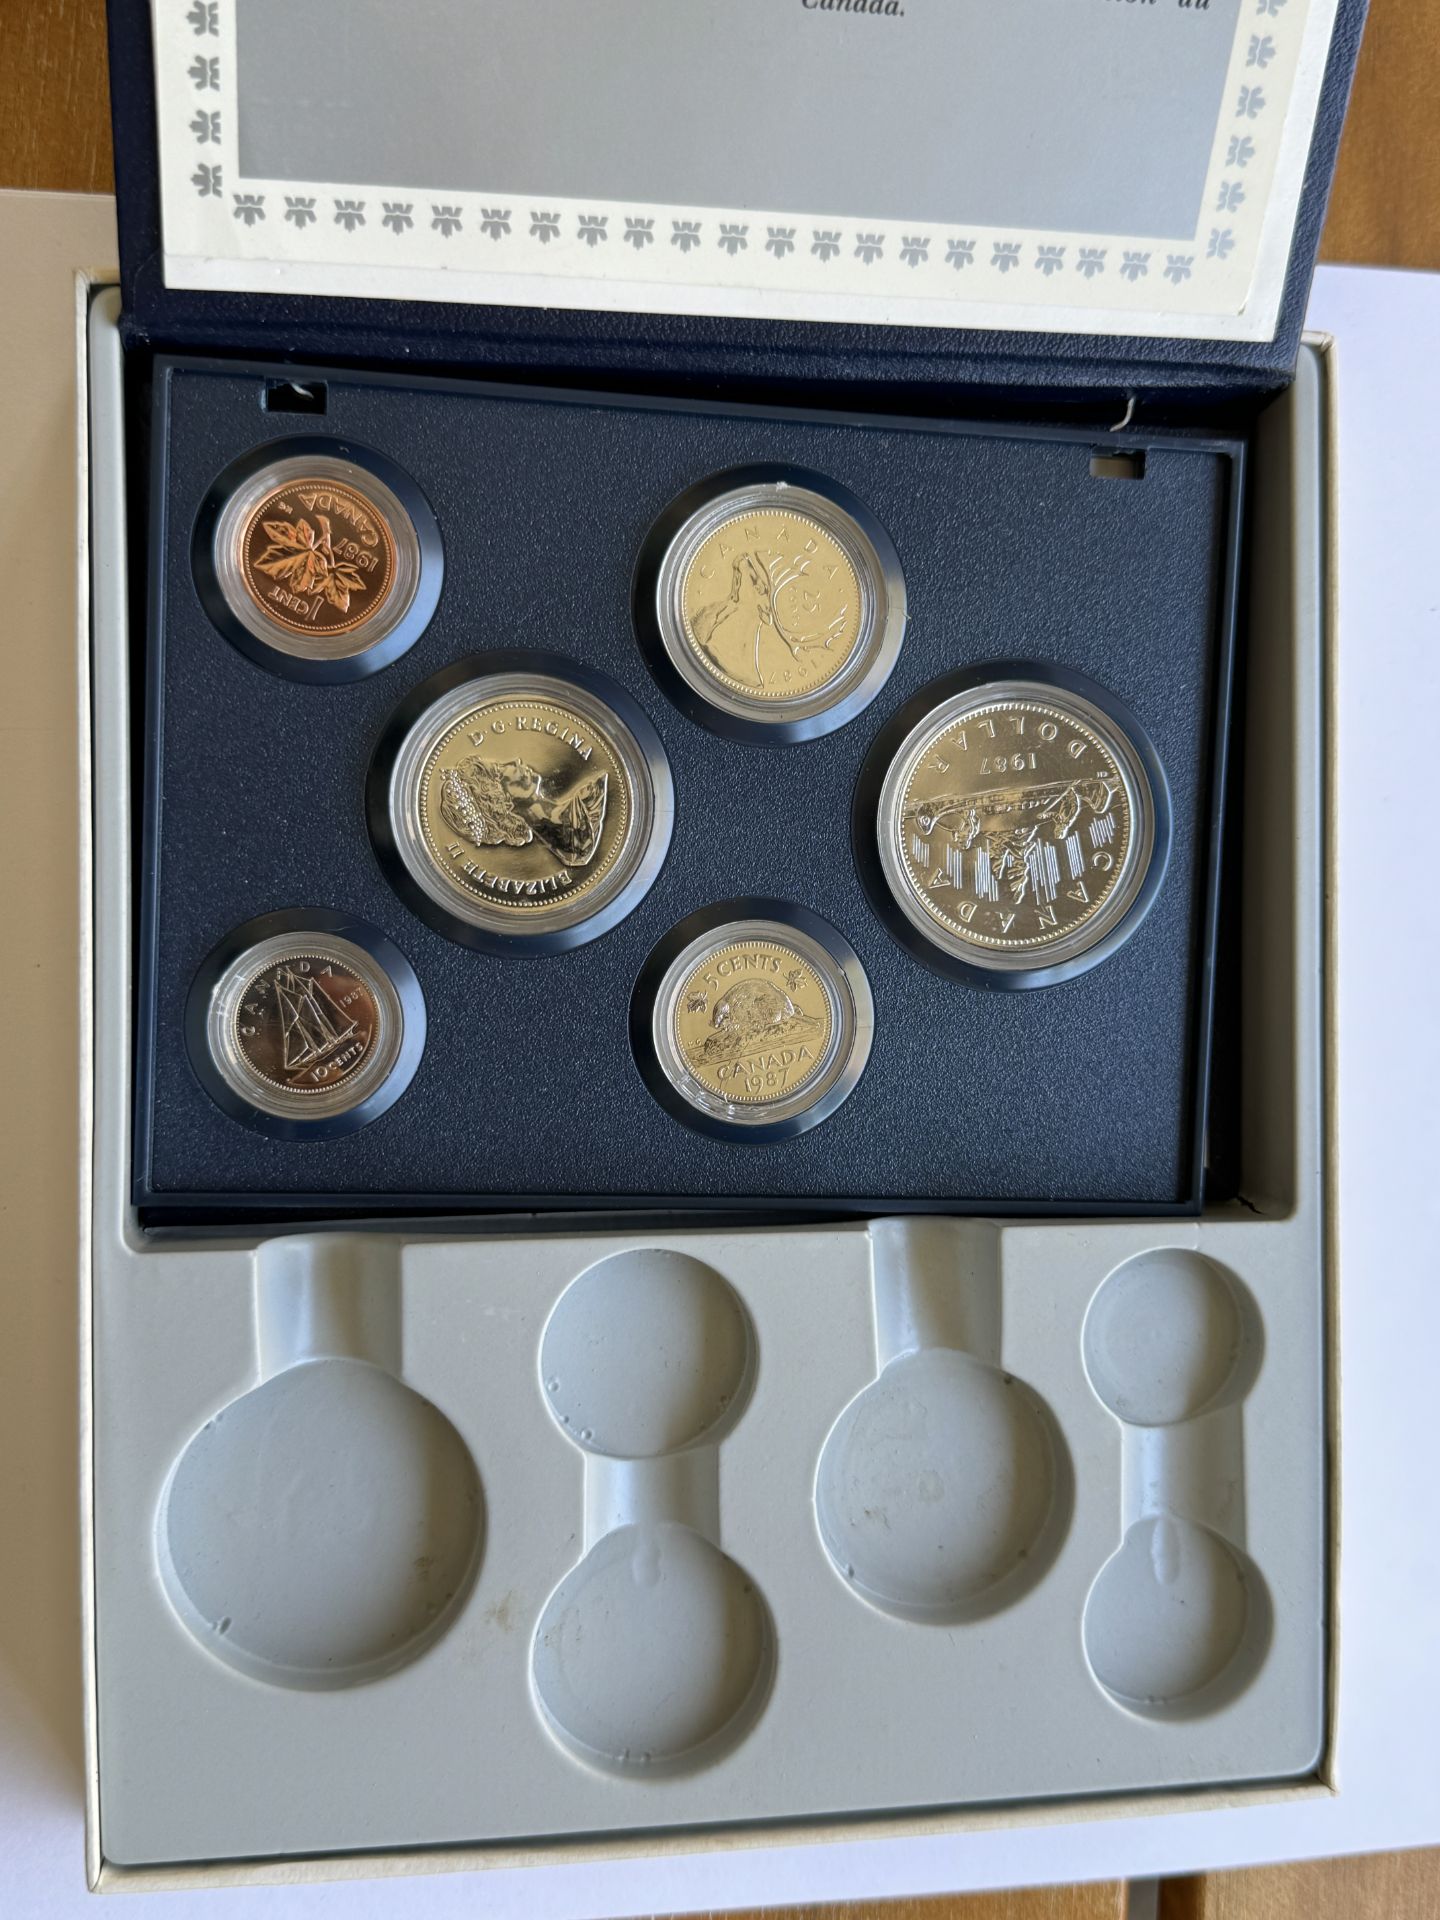 1992 SILVER PROOF SET IN COINS ROYAL CANANDIAN MINT - Image 3 of 3